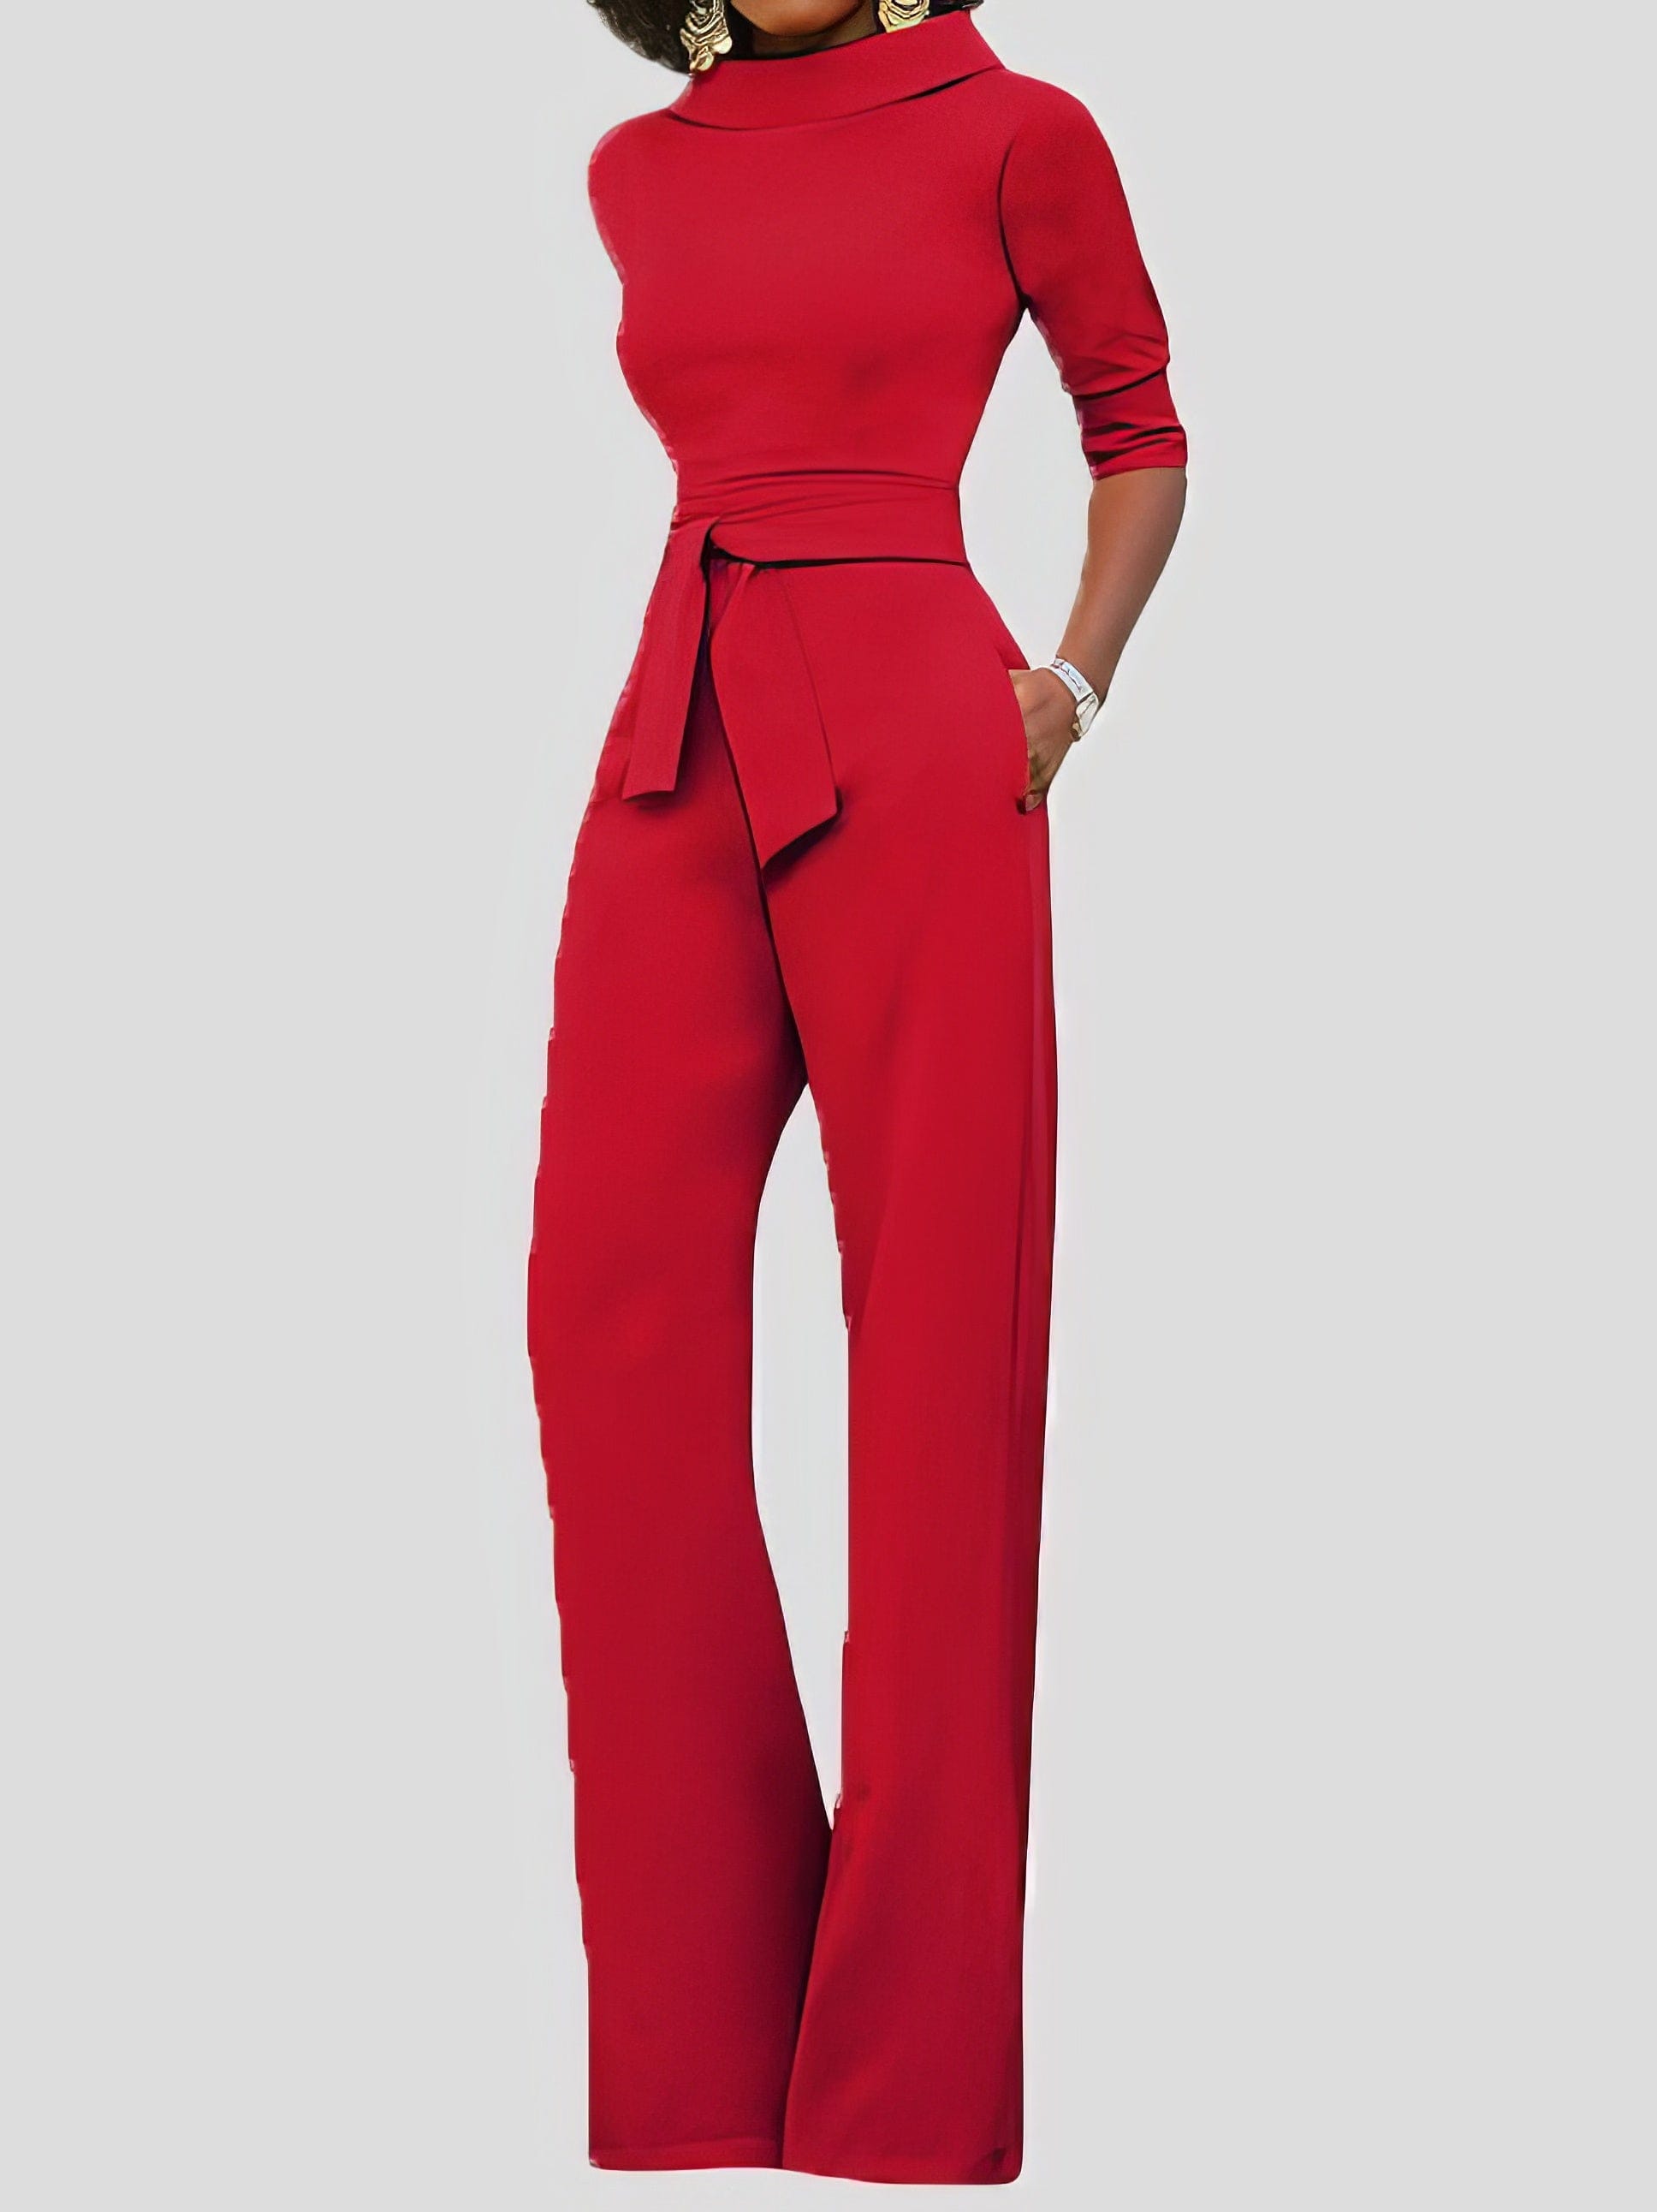 Solid Five-Point Sleeve Belted Wide-Leg Jumpsuit JUM2112291364REDS Red / 2 (S)